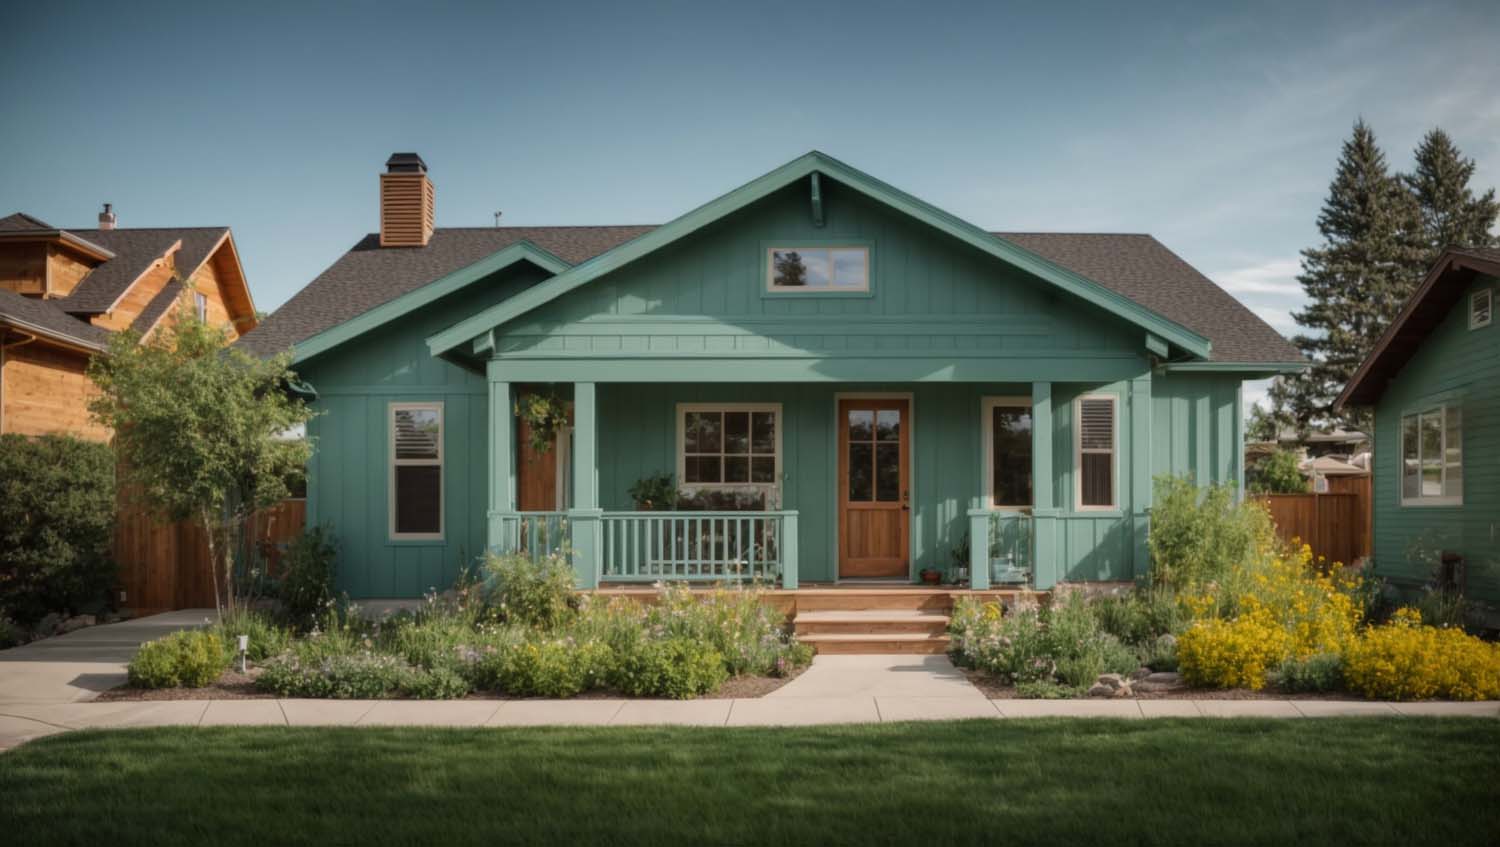 A Craftsman home in Longmont, Colorado, with a shimmering Diamond Kote finish.